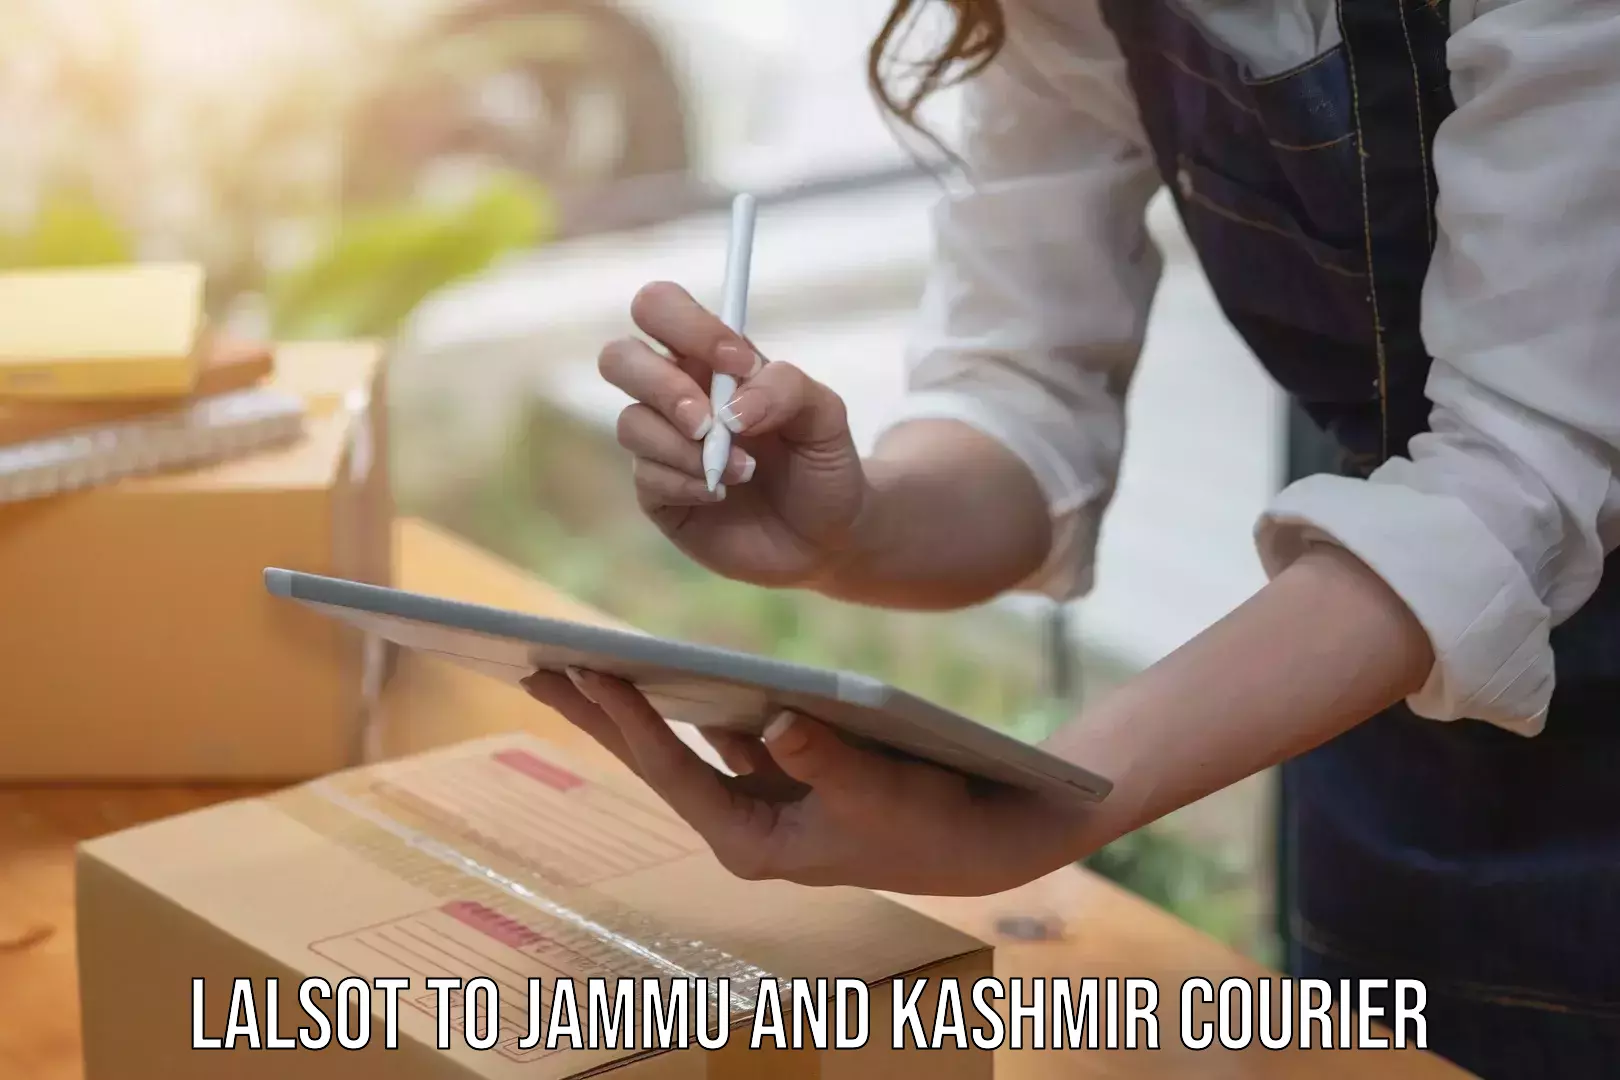 Sustainable courier practices Lalsot to Srinagar Kashmir